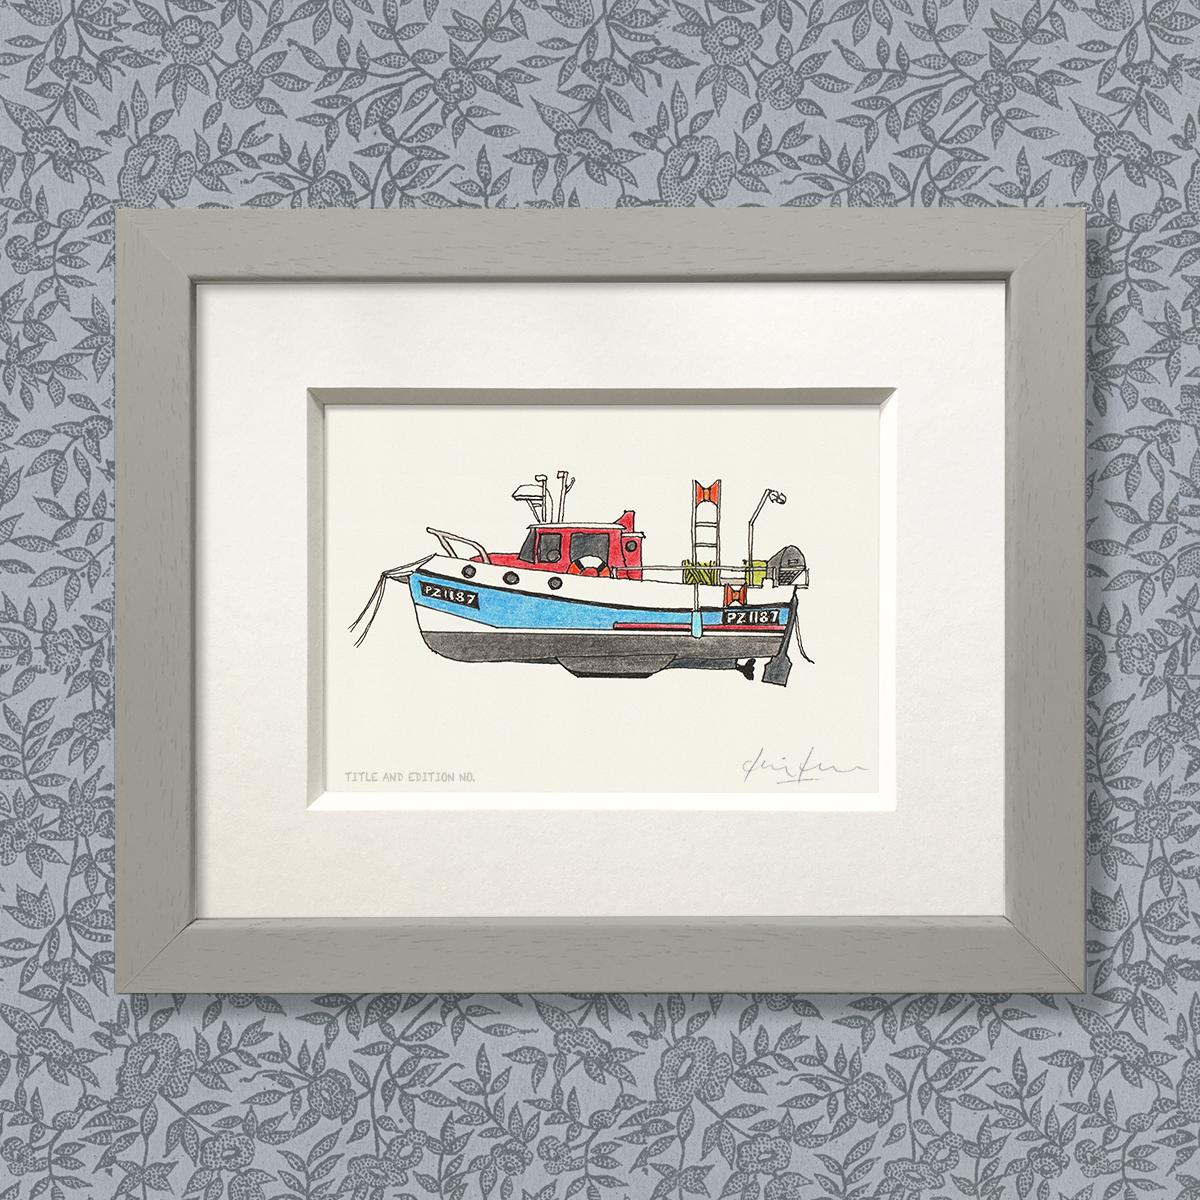 Limited edition print from pen and ink drawing of a fishing boat in a grey frame